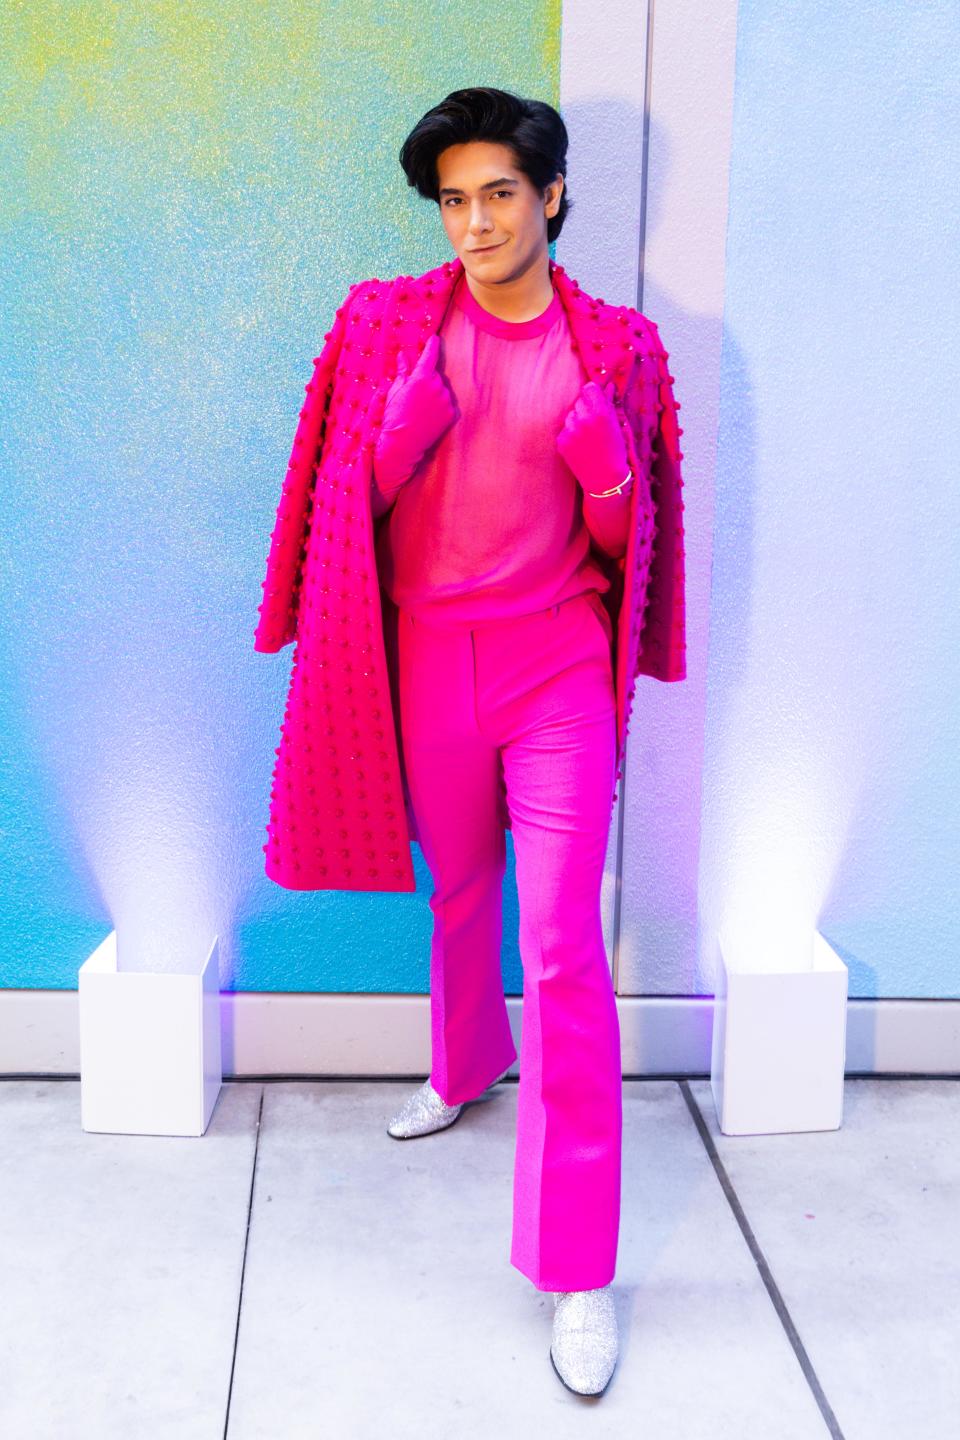 SAN FRANCISCO, CA - April 19 - Adeel Khan attends SFMOMA's 2023 Art Bash on April 19th 2023 at SFMOMA in San Francisco, CA (Photo - Ando Caulfield for Drew Altizer Photography)